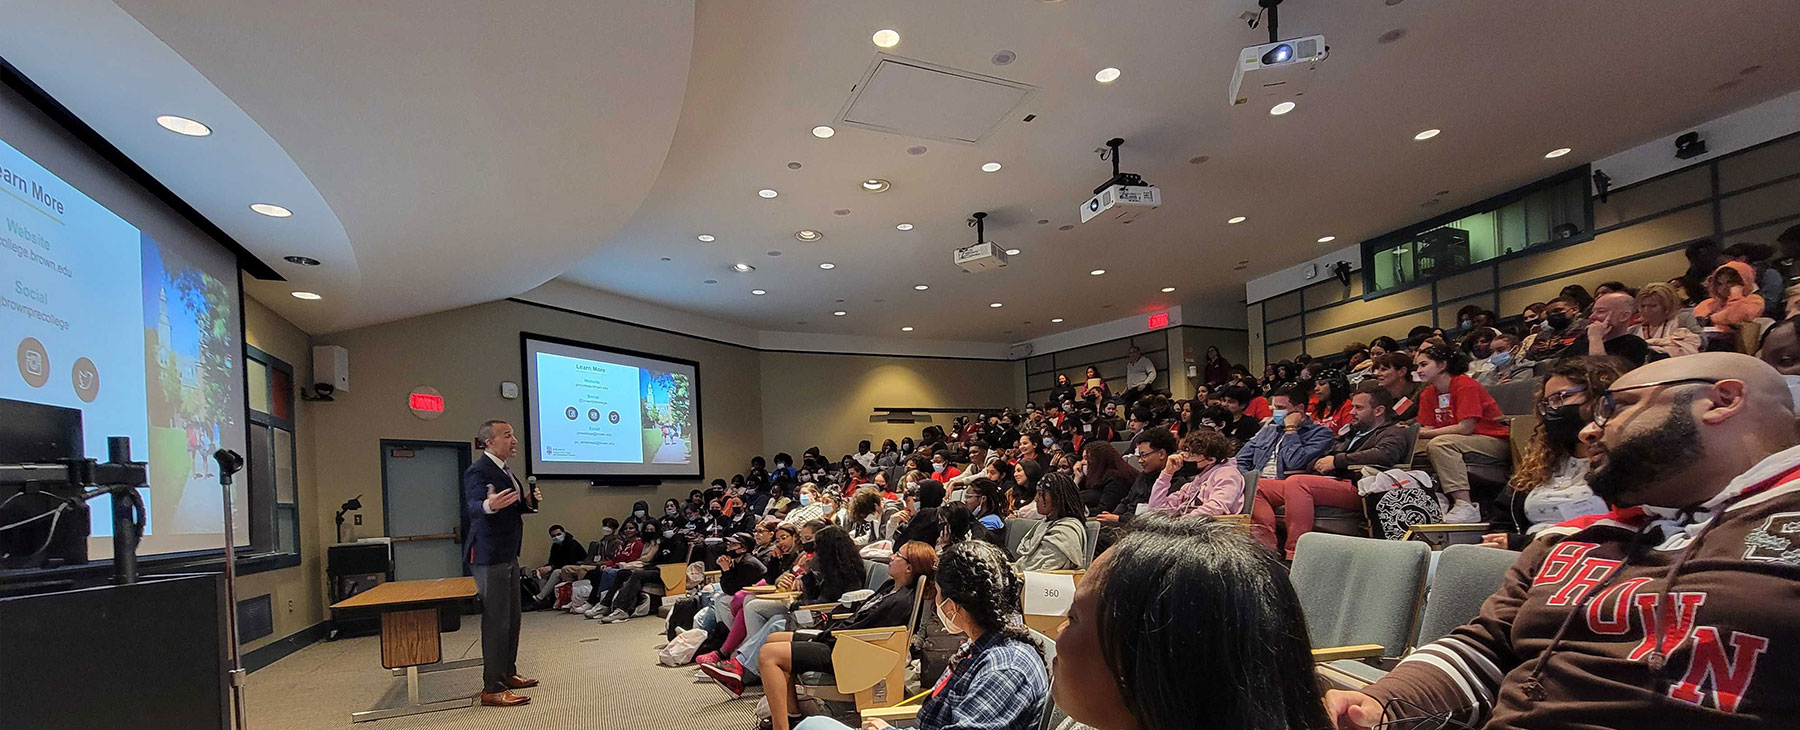 College Day at Brown gives Providence high schoolers a glimpse of academic and campus life